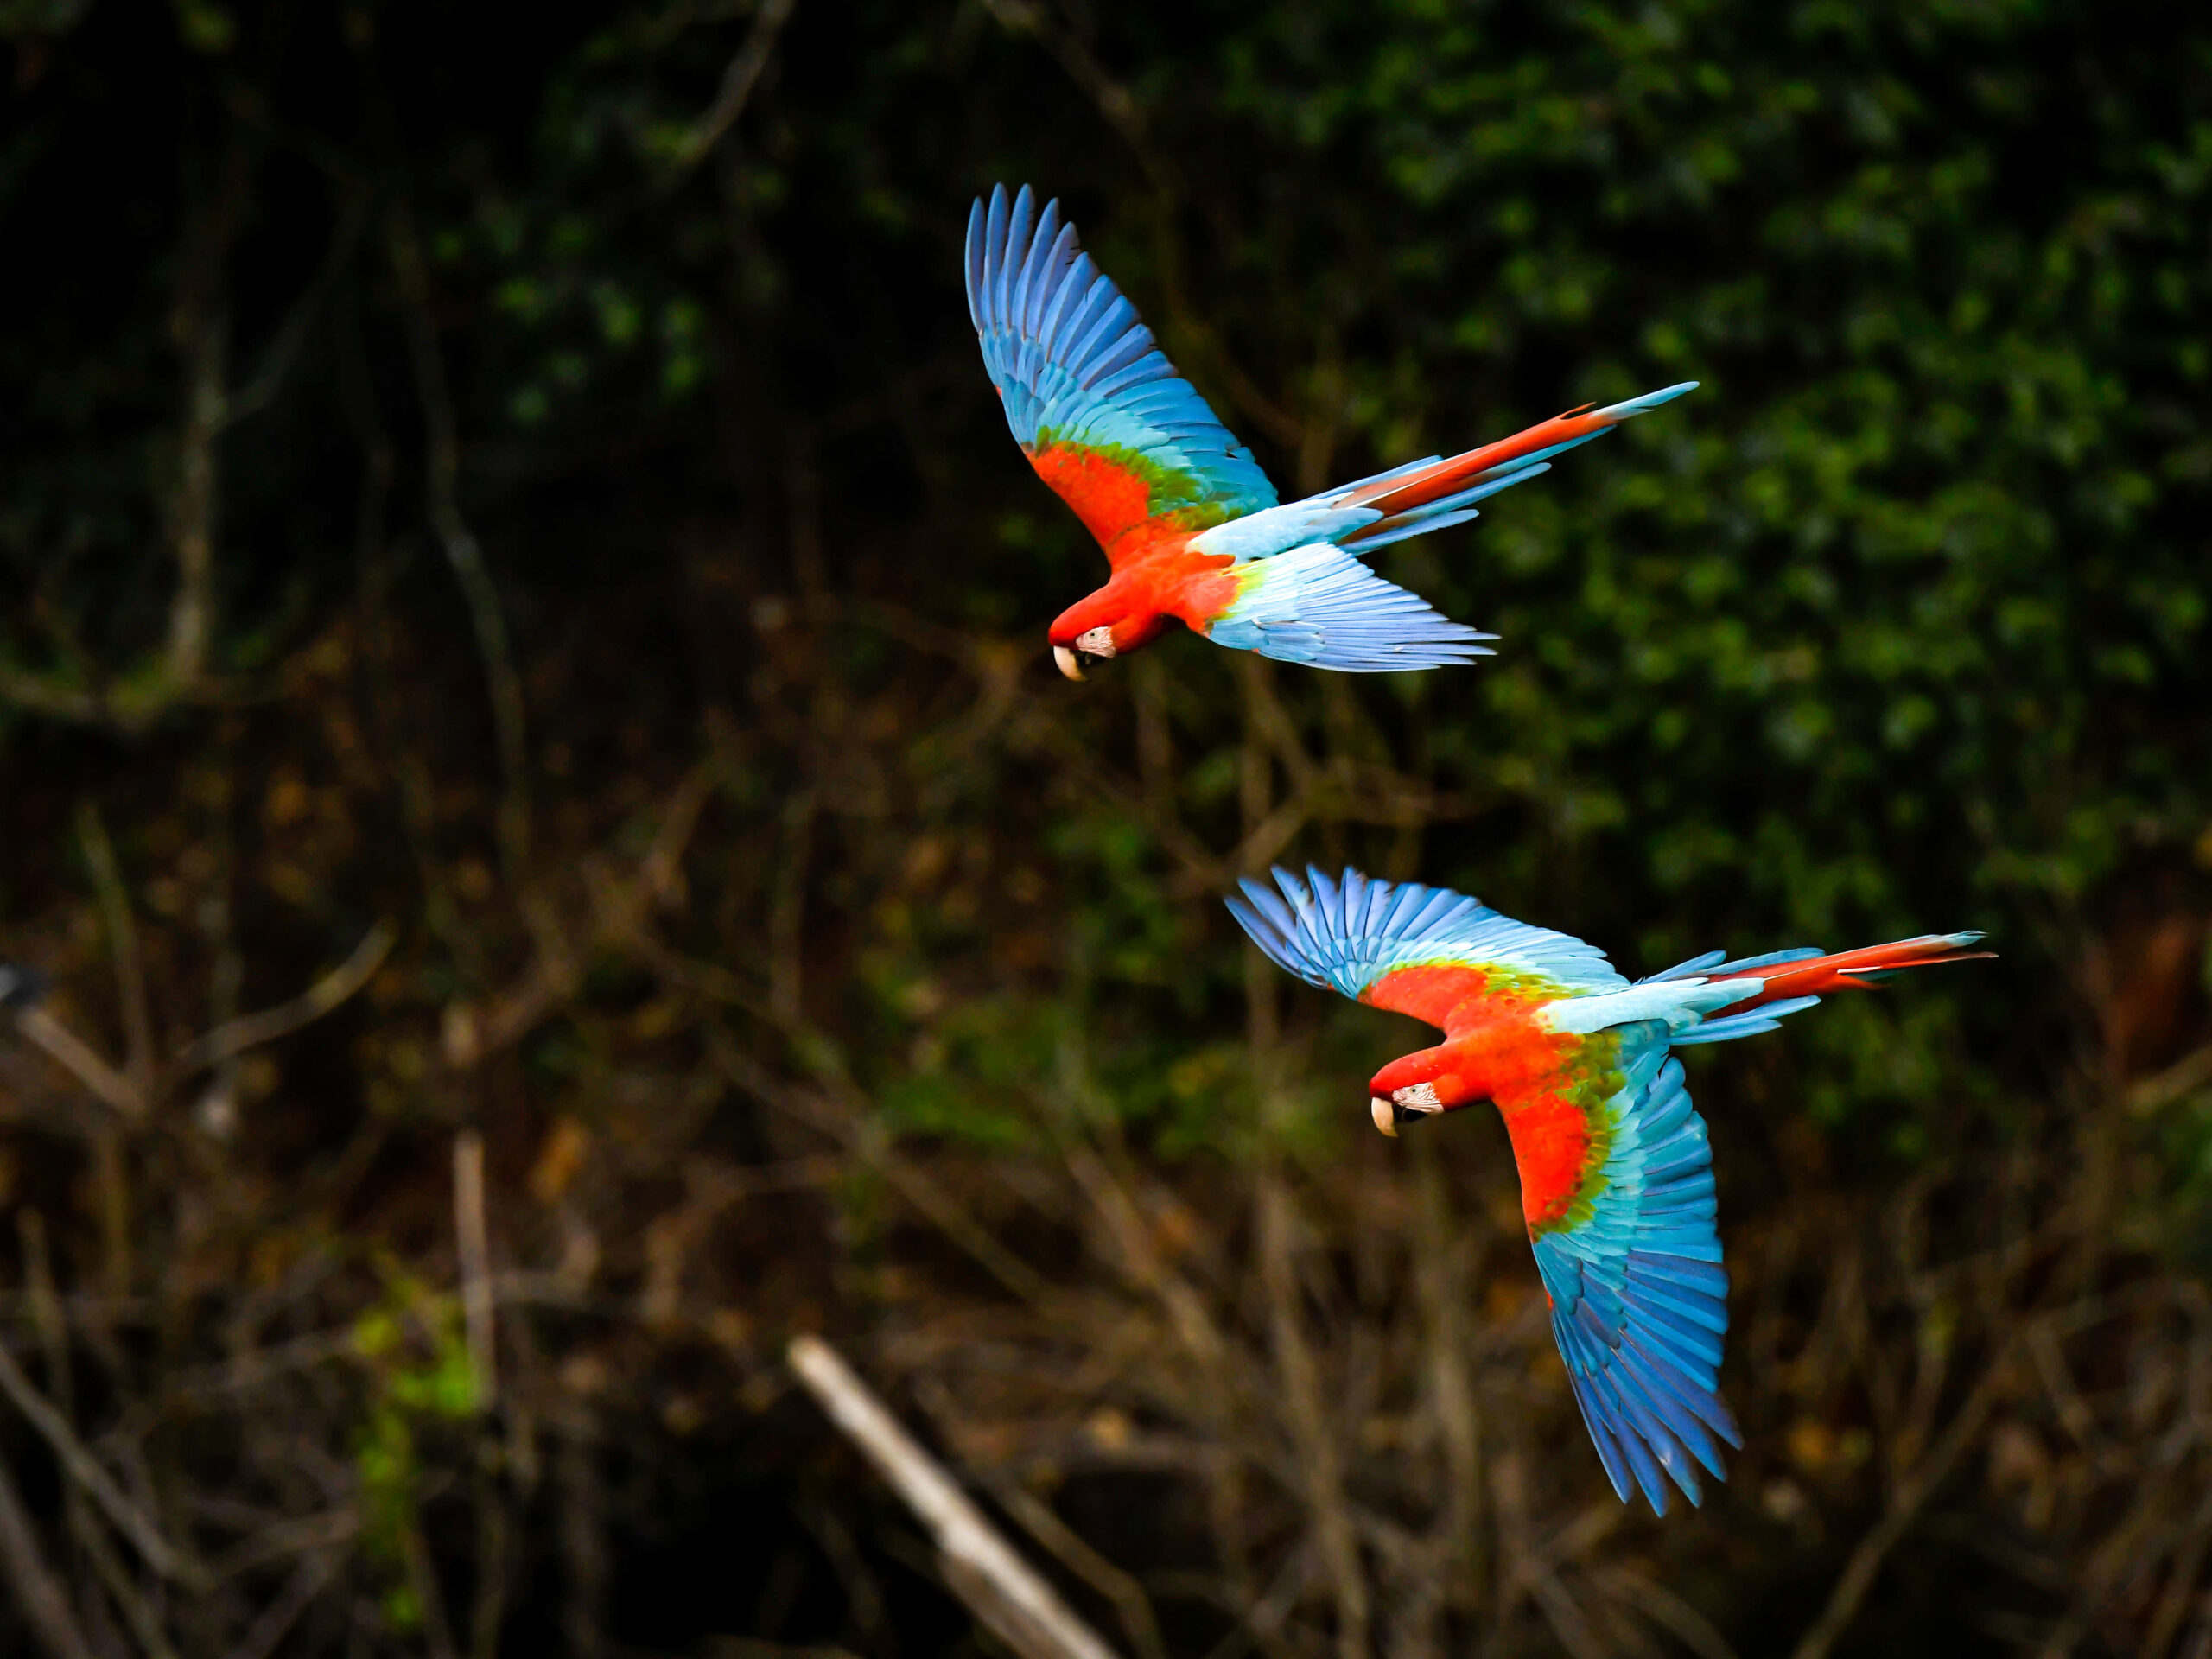 Macaws at the Macaw Sinkhole